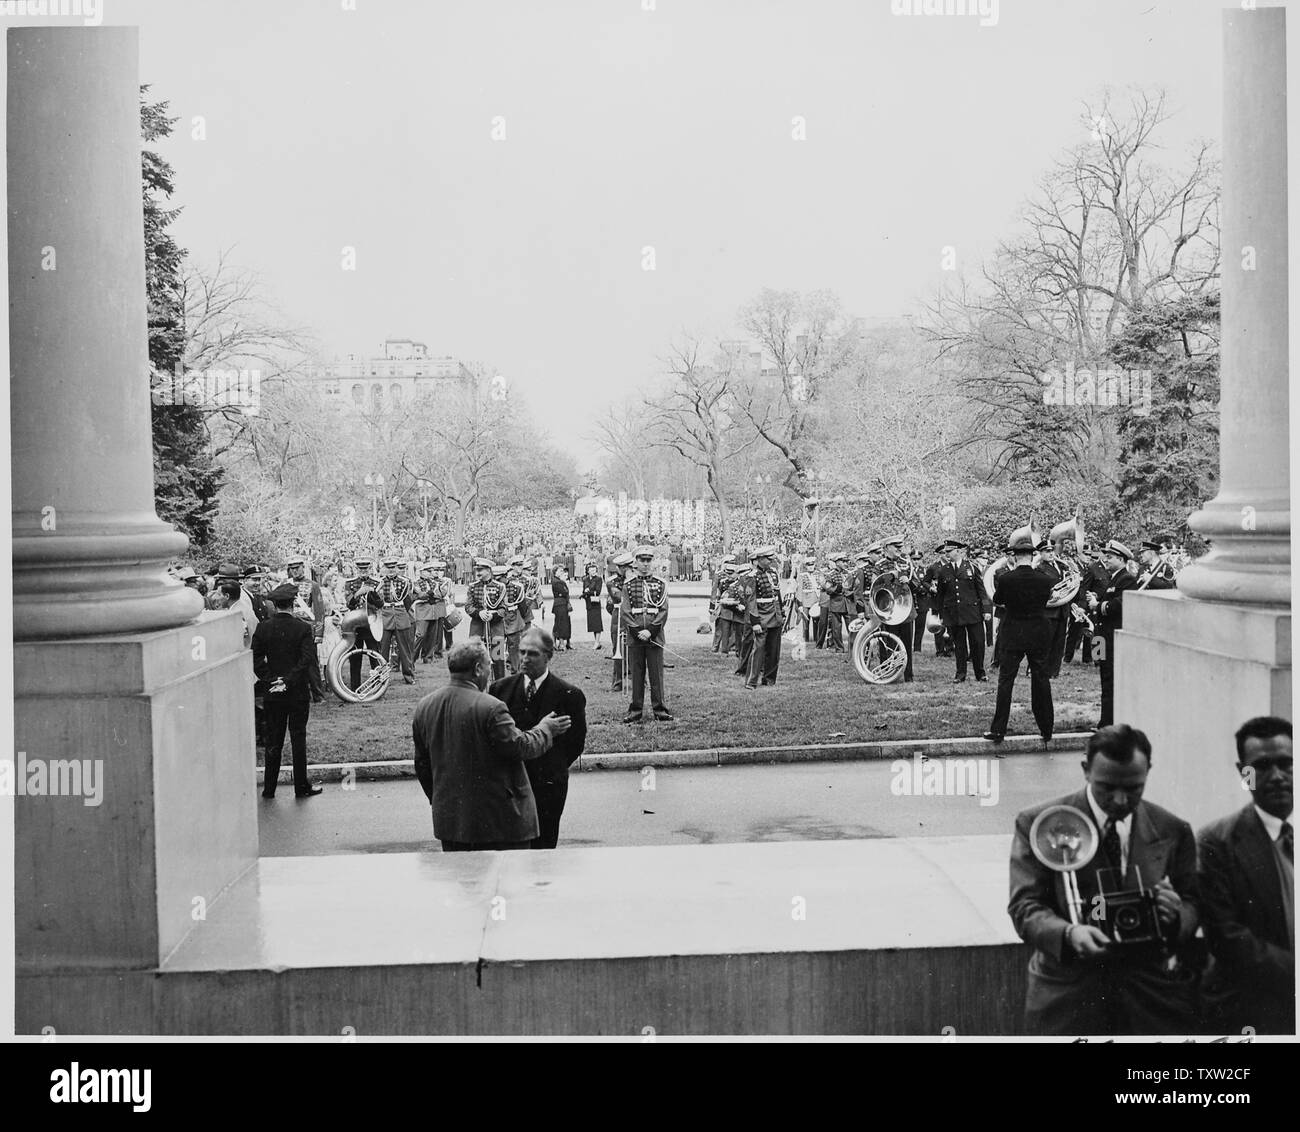 A military band standing on the front lawn of the White House; a large crowd is gathered in Jackson Park across the street. President Truman and Vice President-elect Alben W. Barkley had just returned to Washington after their victory in the 1948 election. Stock Photo